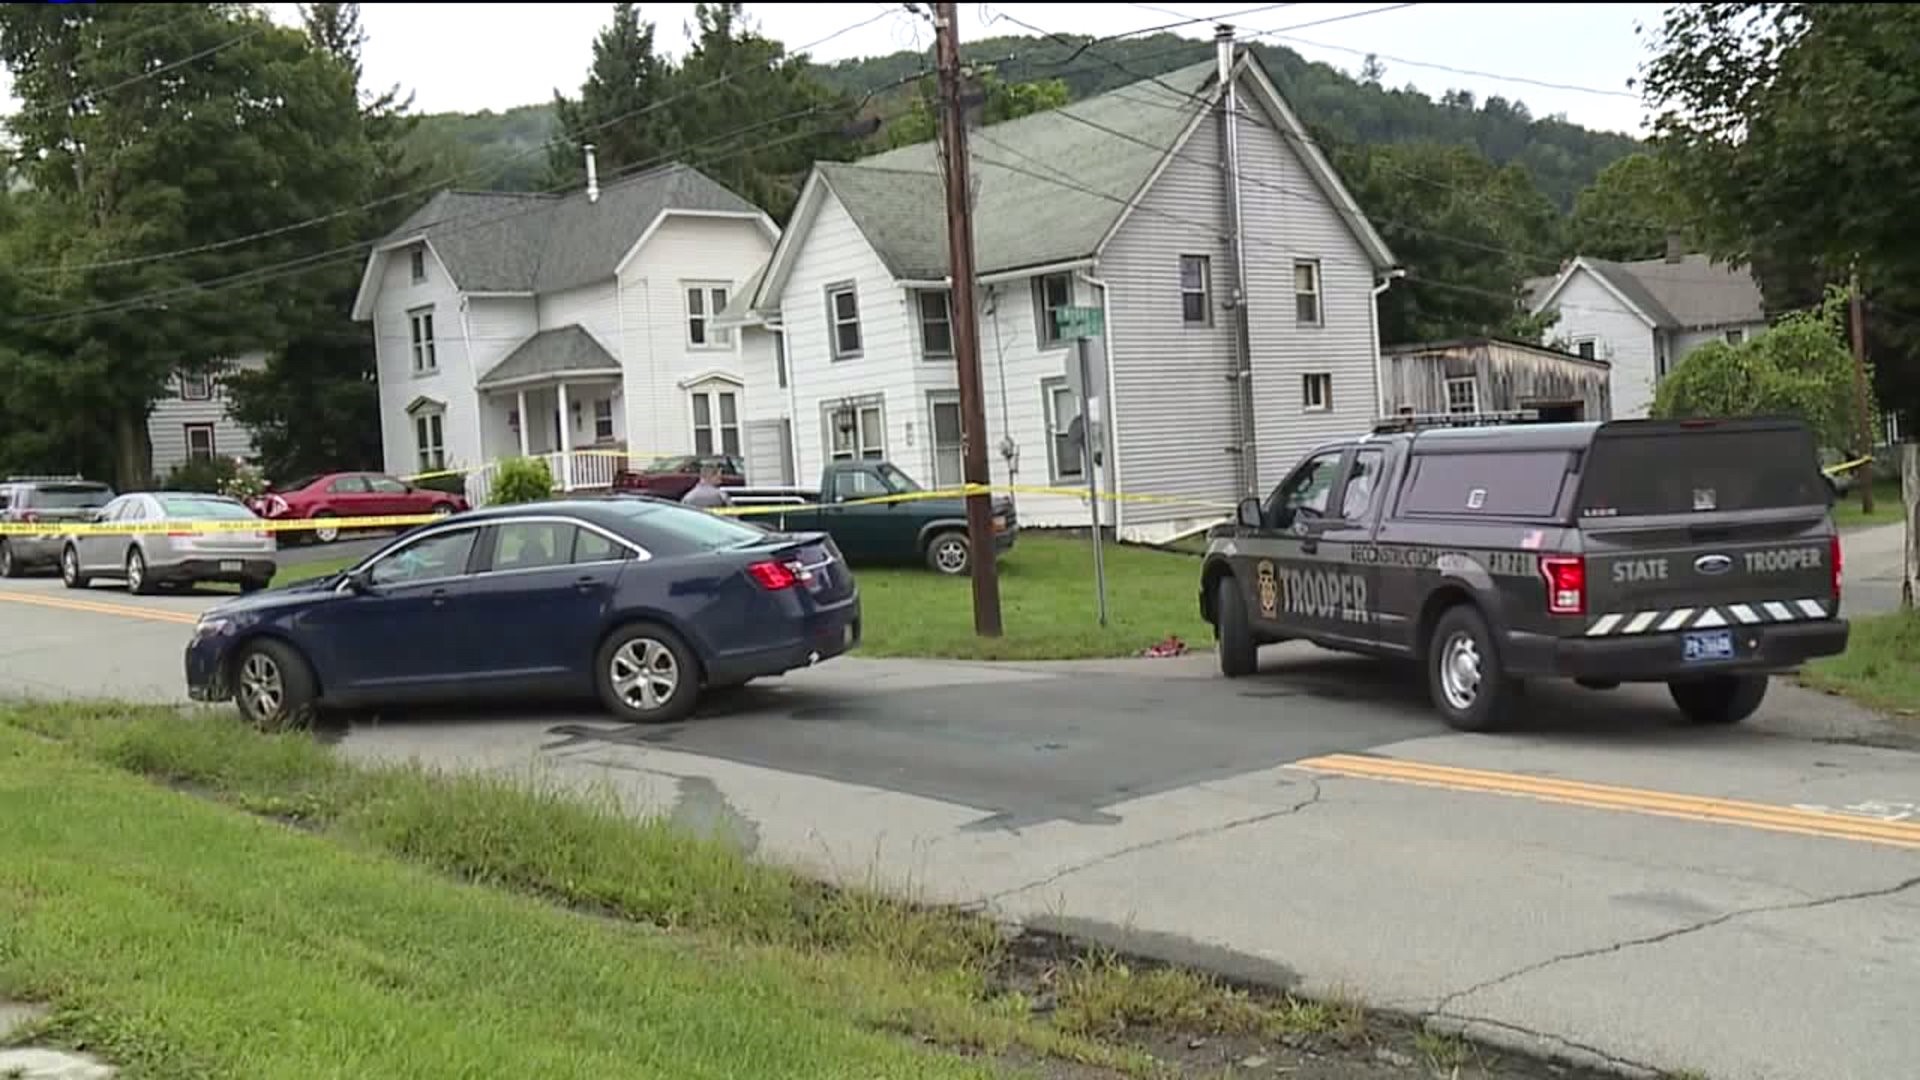 Investigation Continues After Troopers Shoot Man in Susquehanna County